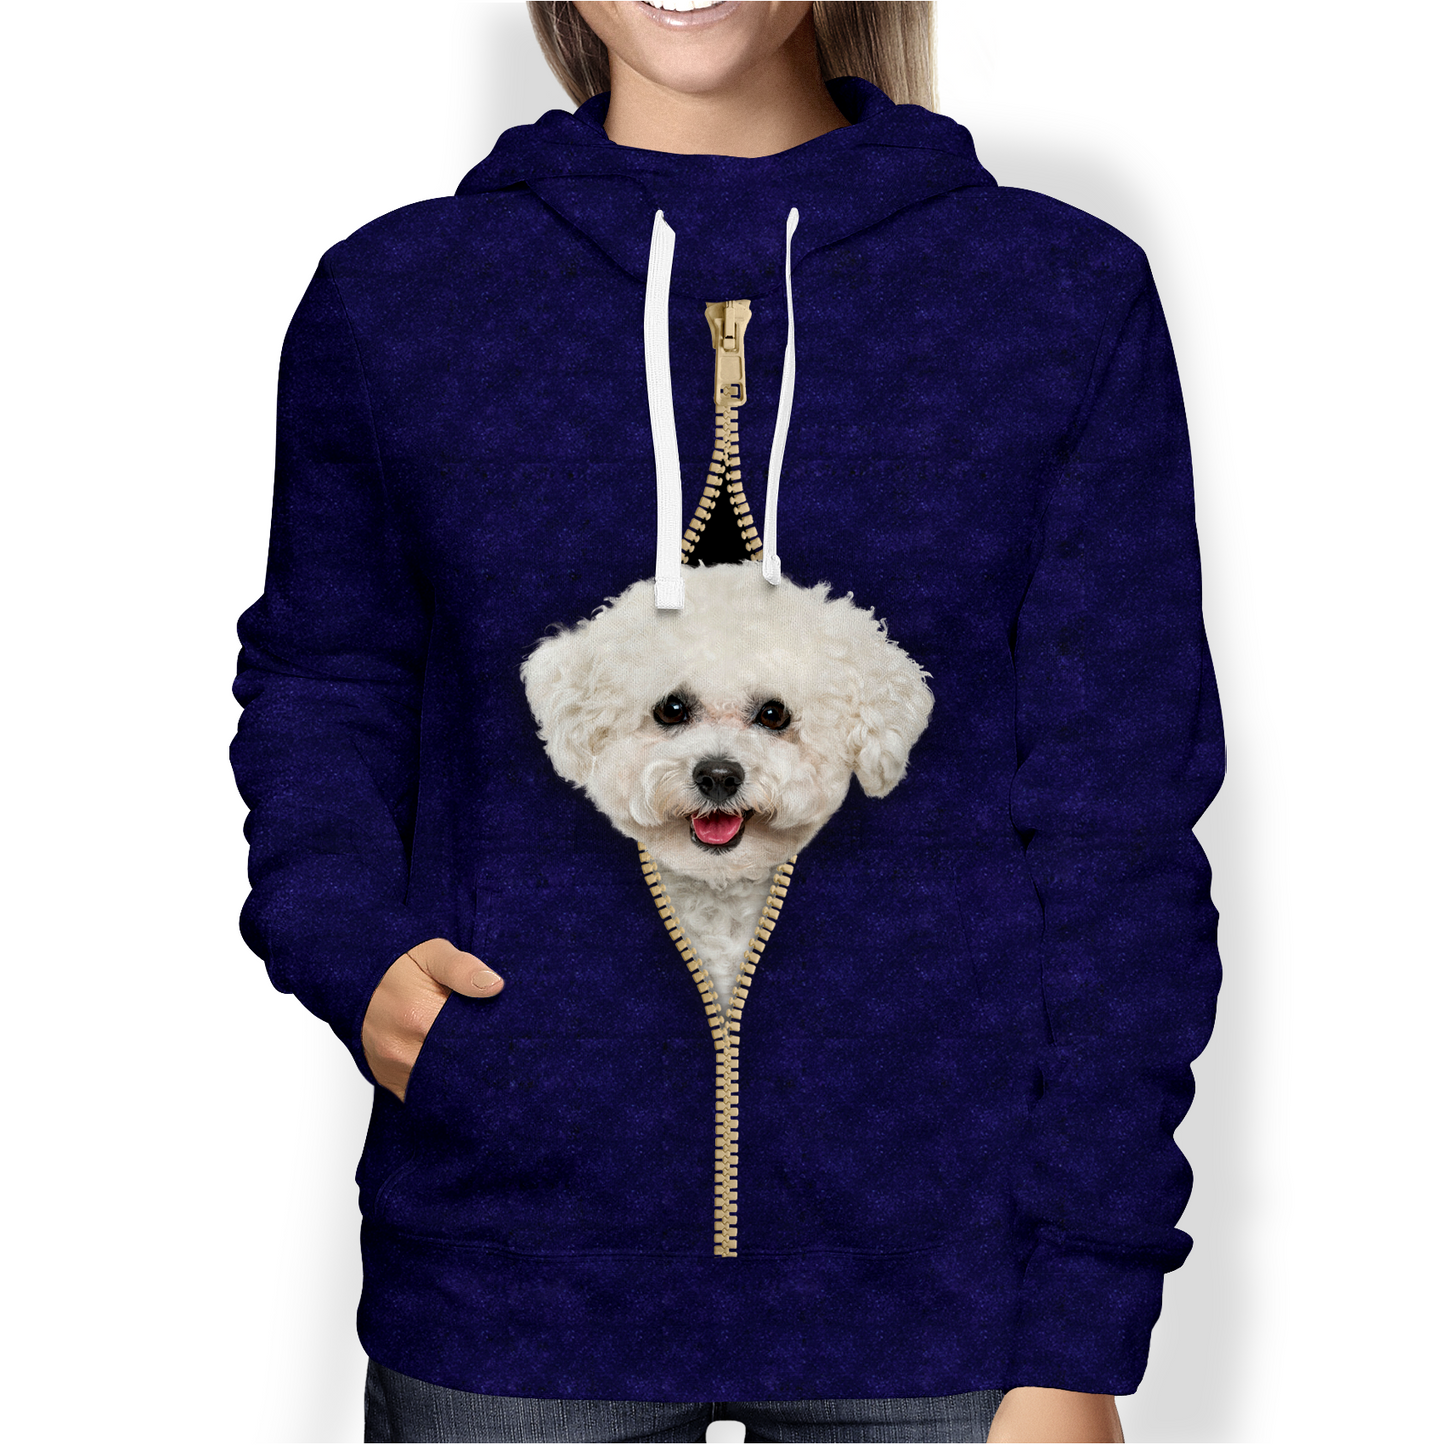 I'm With You - Hoodie with pet - 2